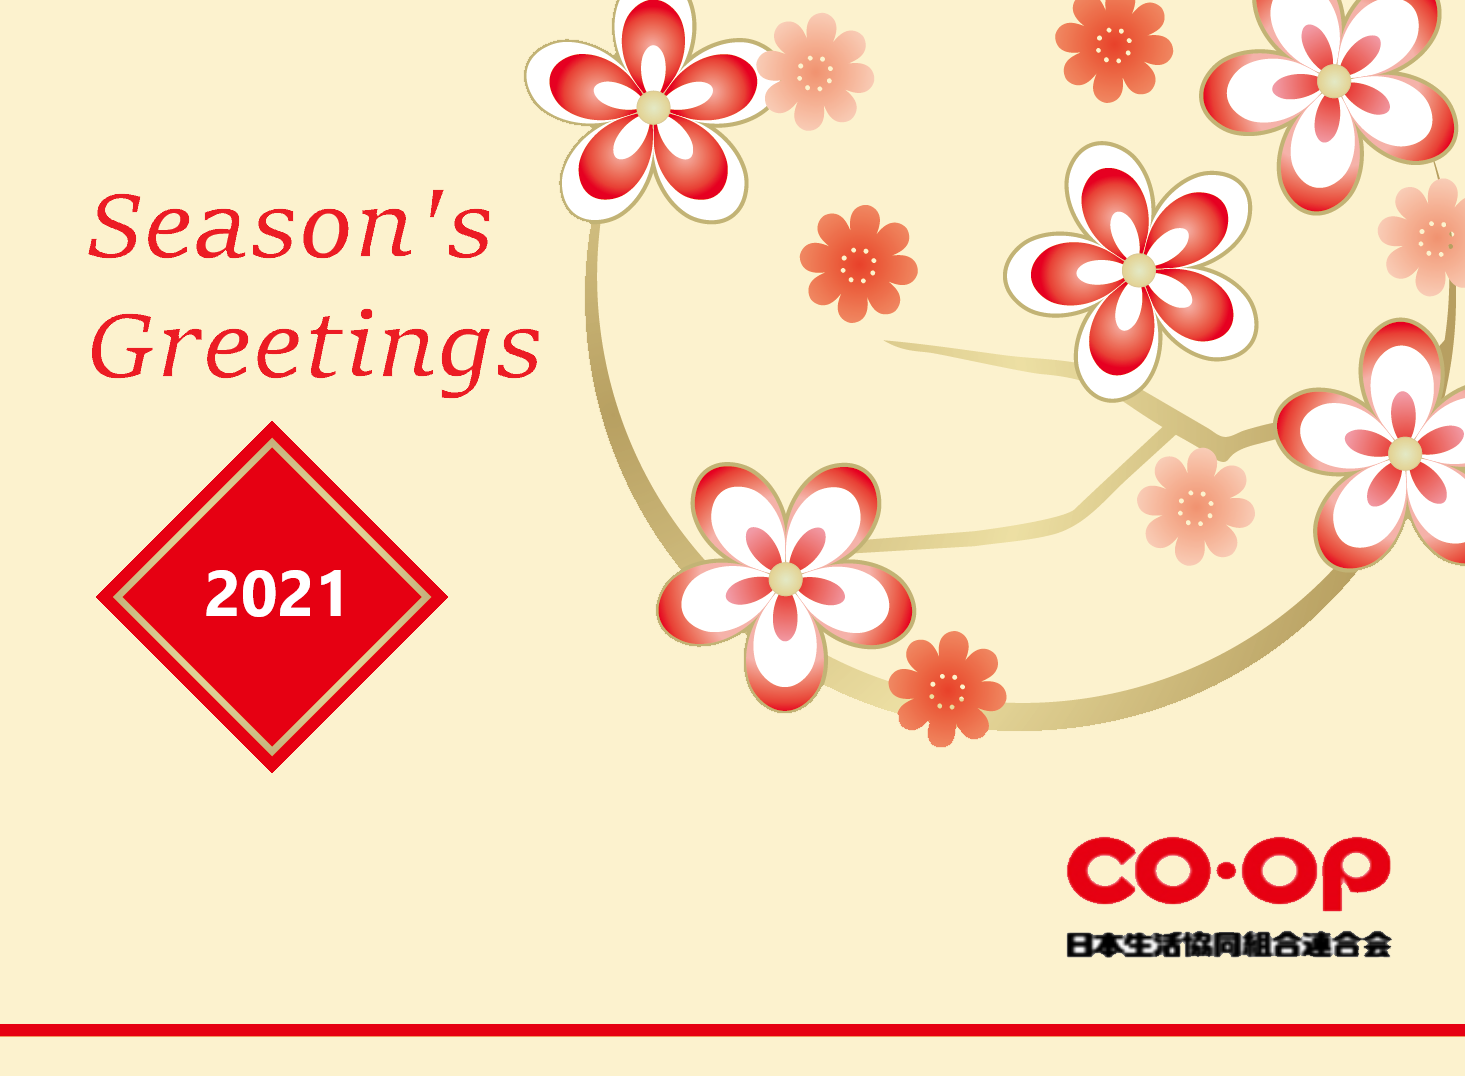 Season's greetings to all our readers